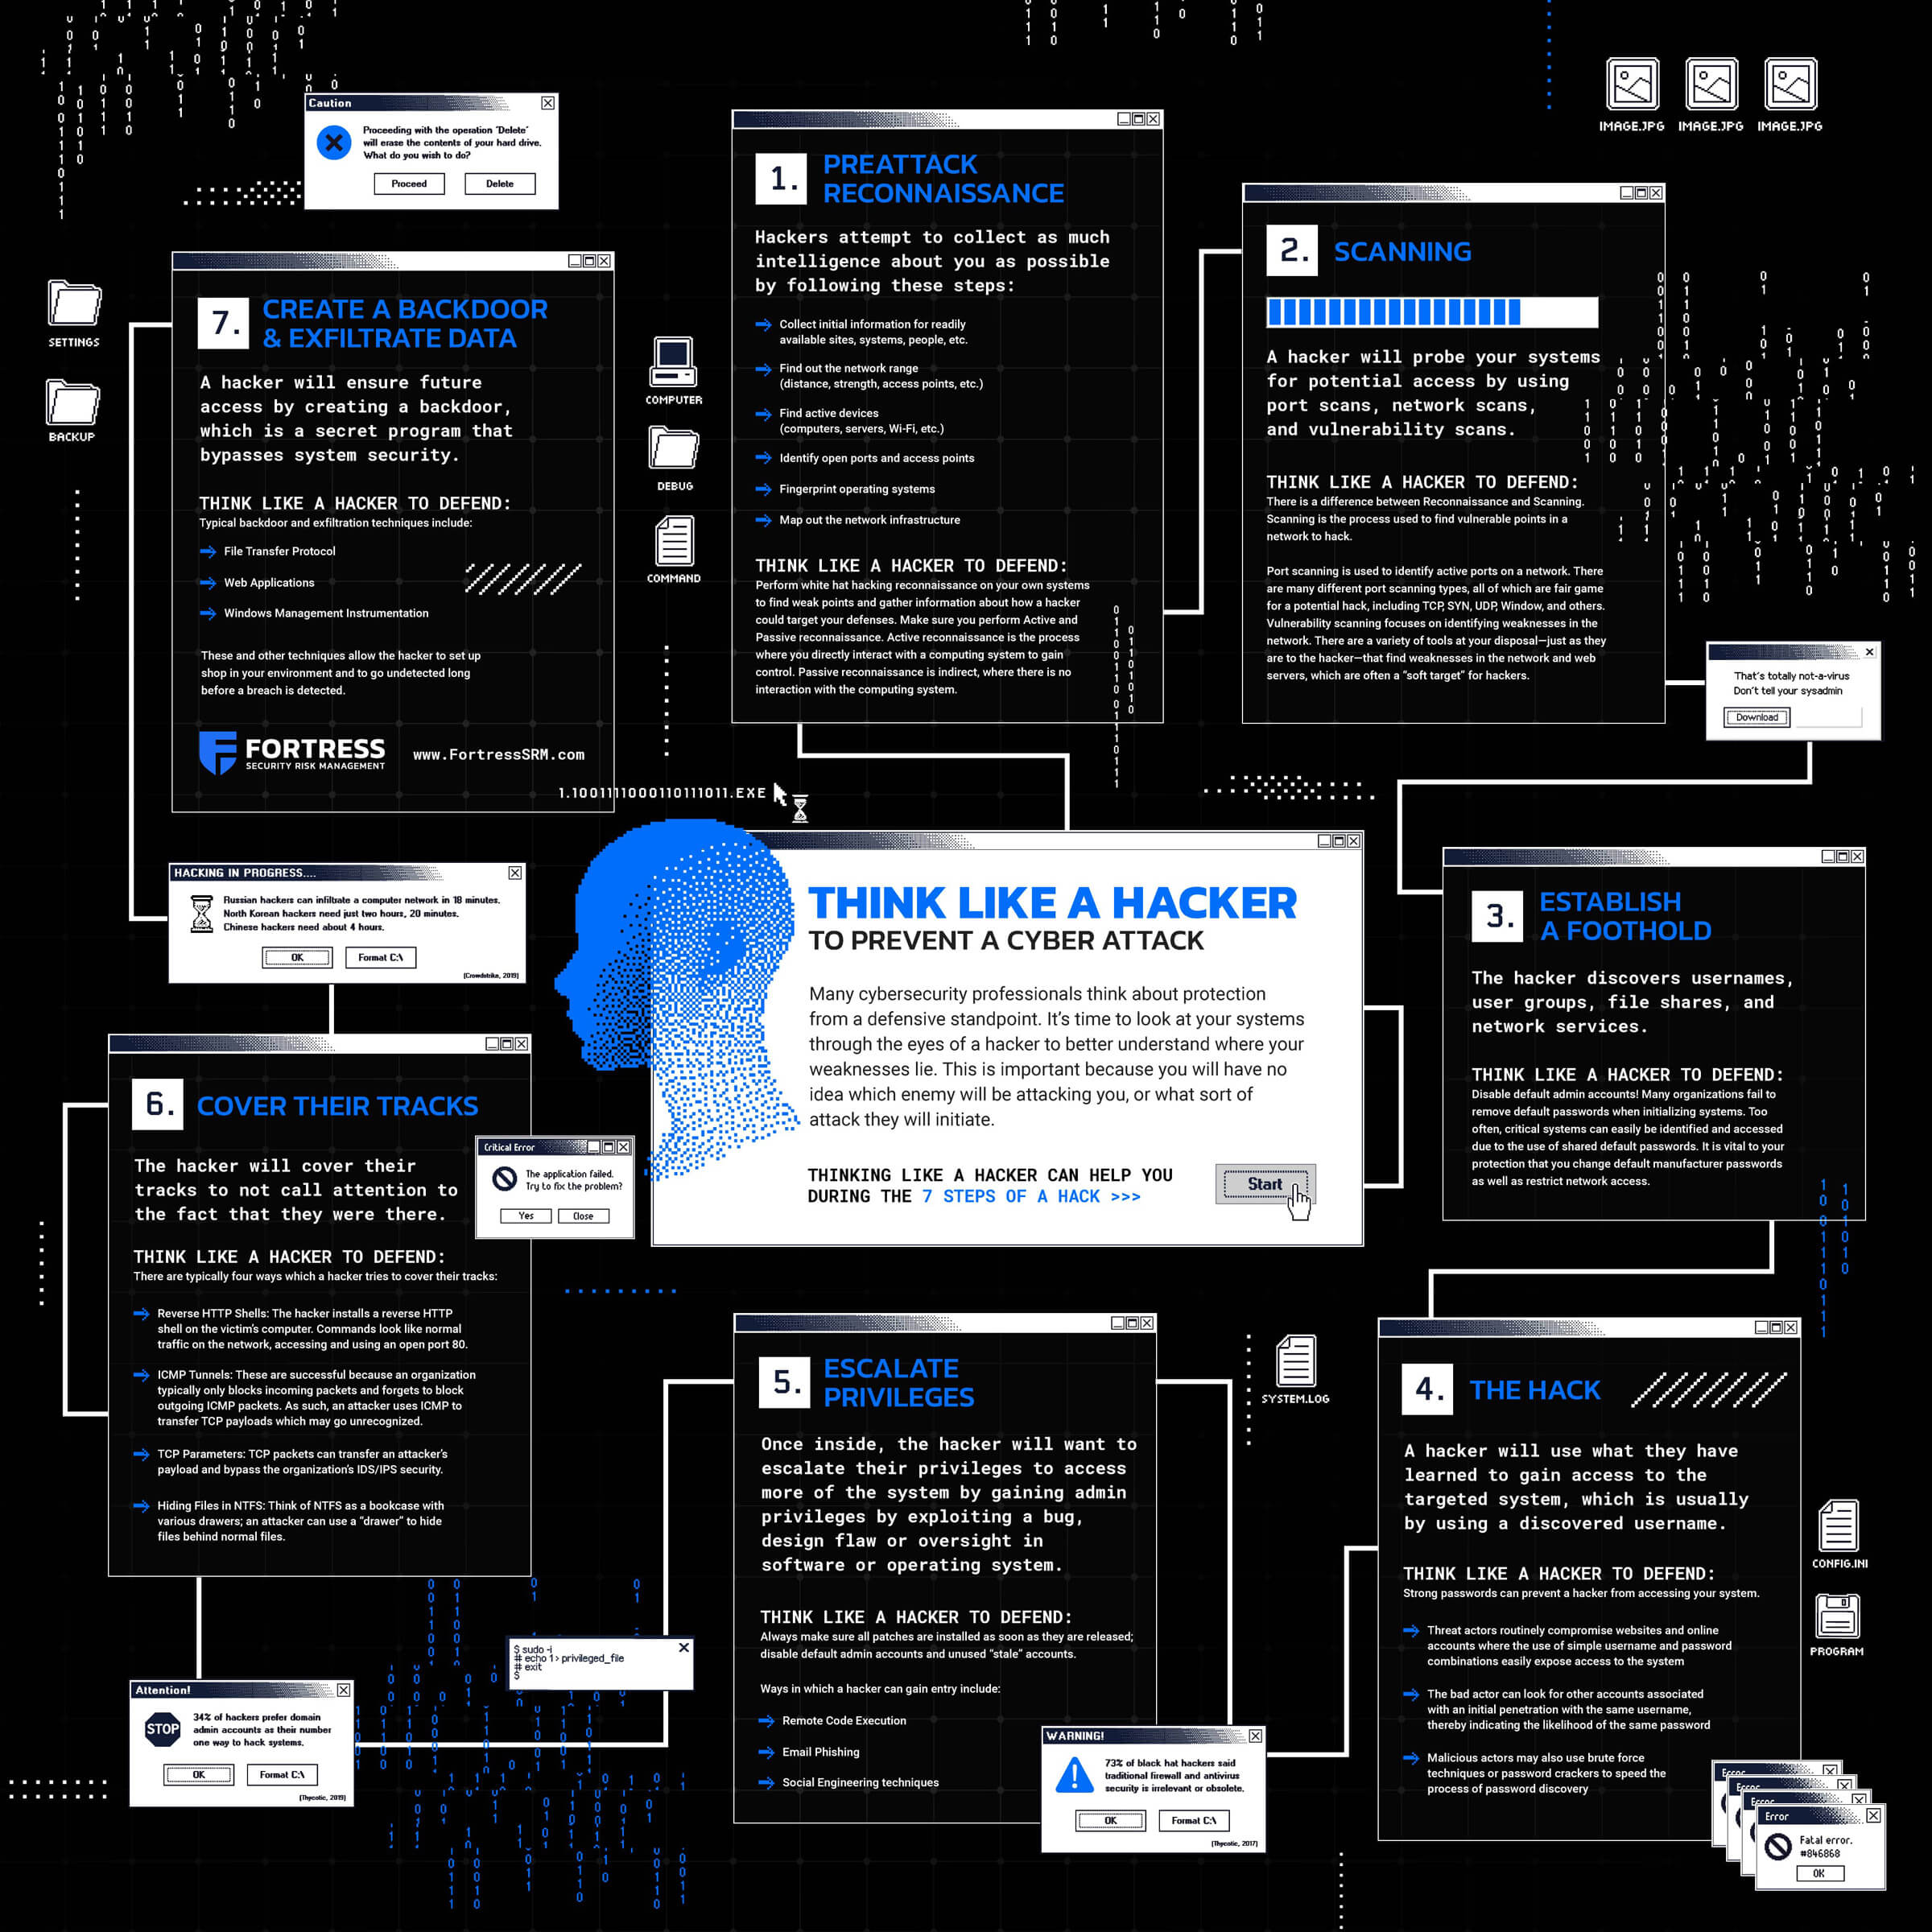 Think Like a Hacker to Prevent a Cyber-Attack Infographic